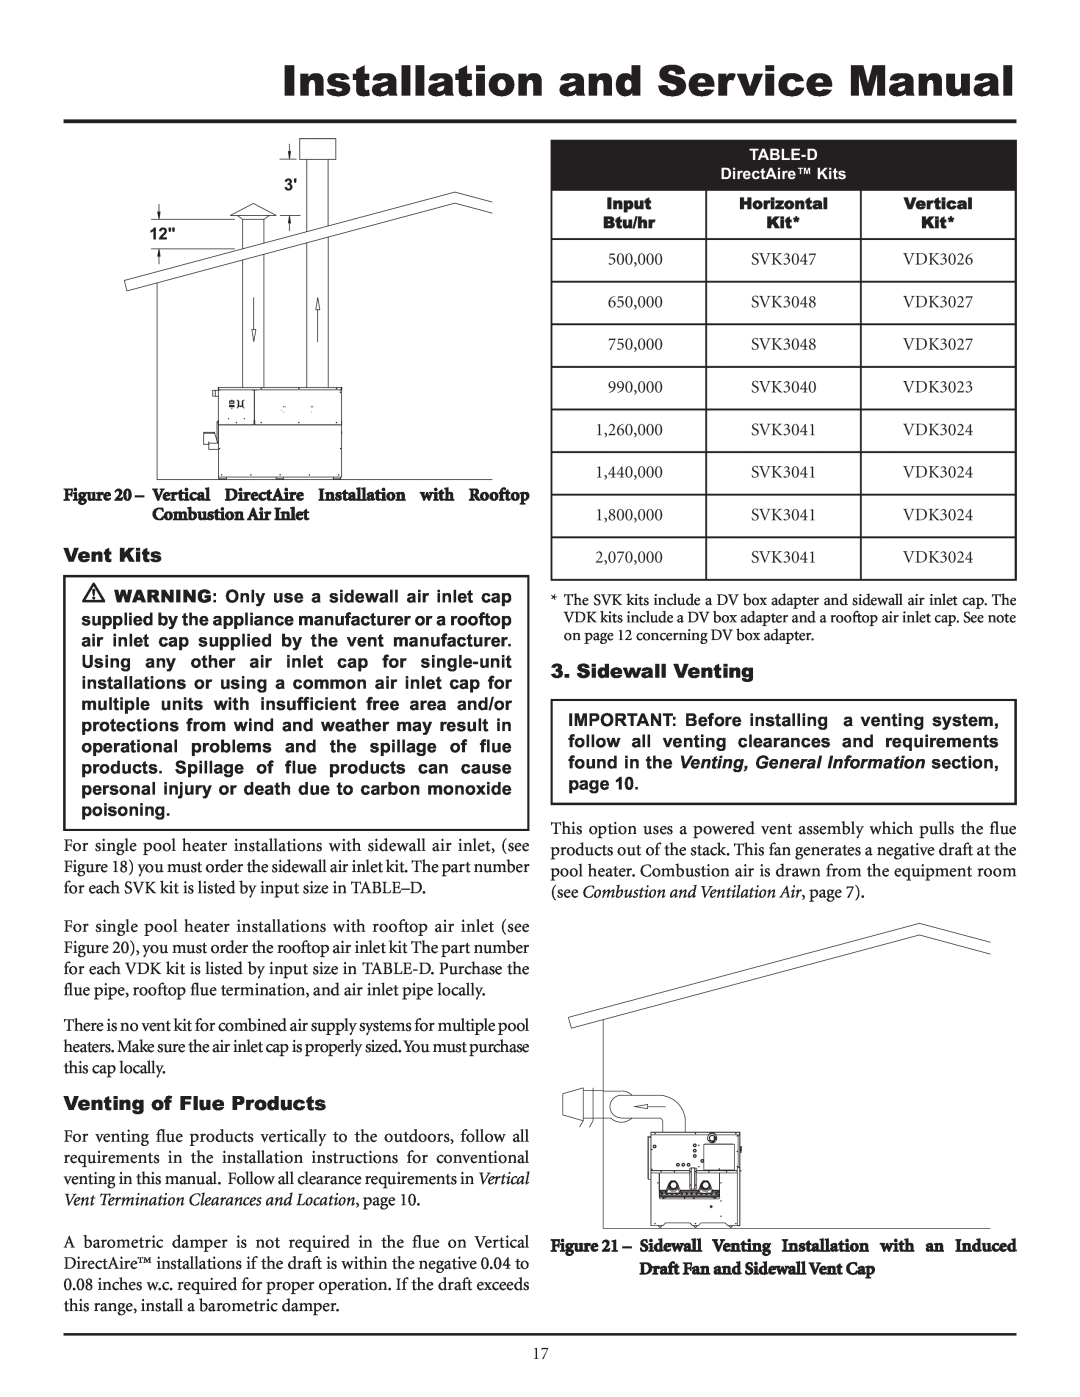 Lochinvar F0600187510 service manual Vent Kits, Venting of Flue Products, Sidewall Venting, Installation and Service Manual 